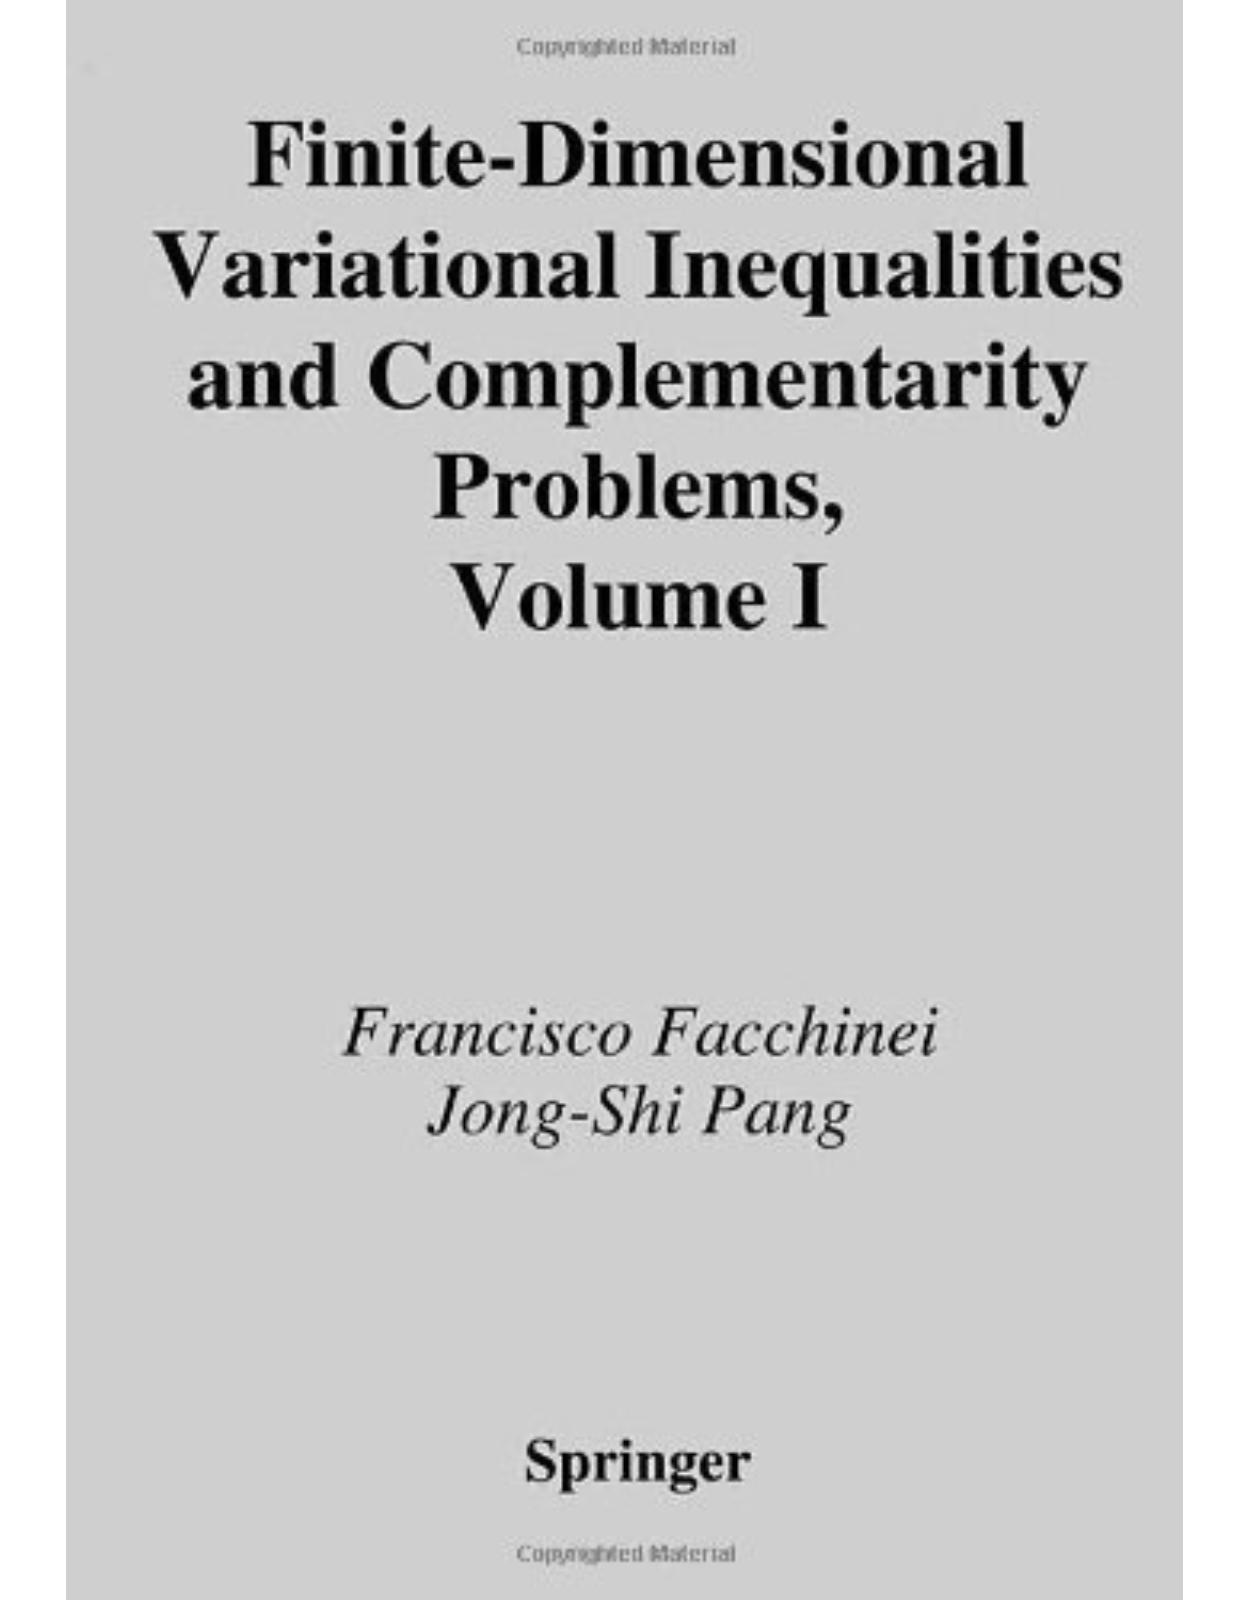 Finite-Dimensional Variational Inequalities and Complementarity Problems: v. 1 (Springer Series in Operations Research and Financial Engineering)